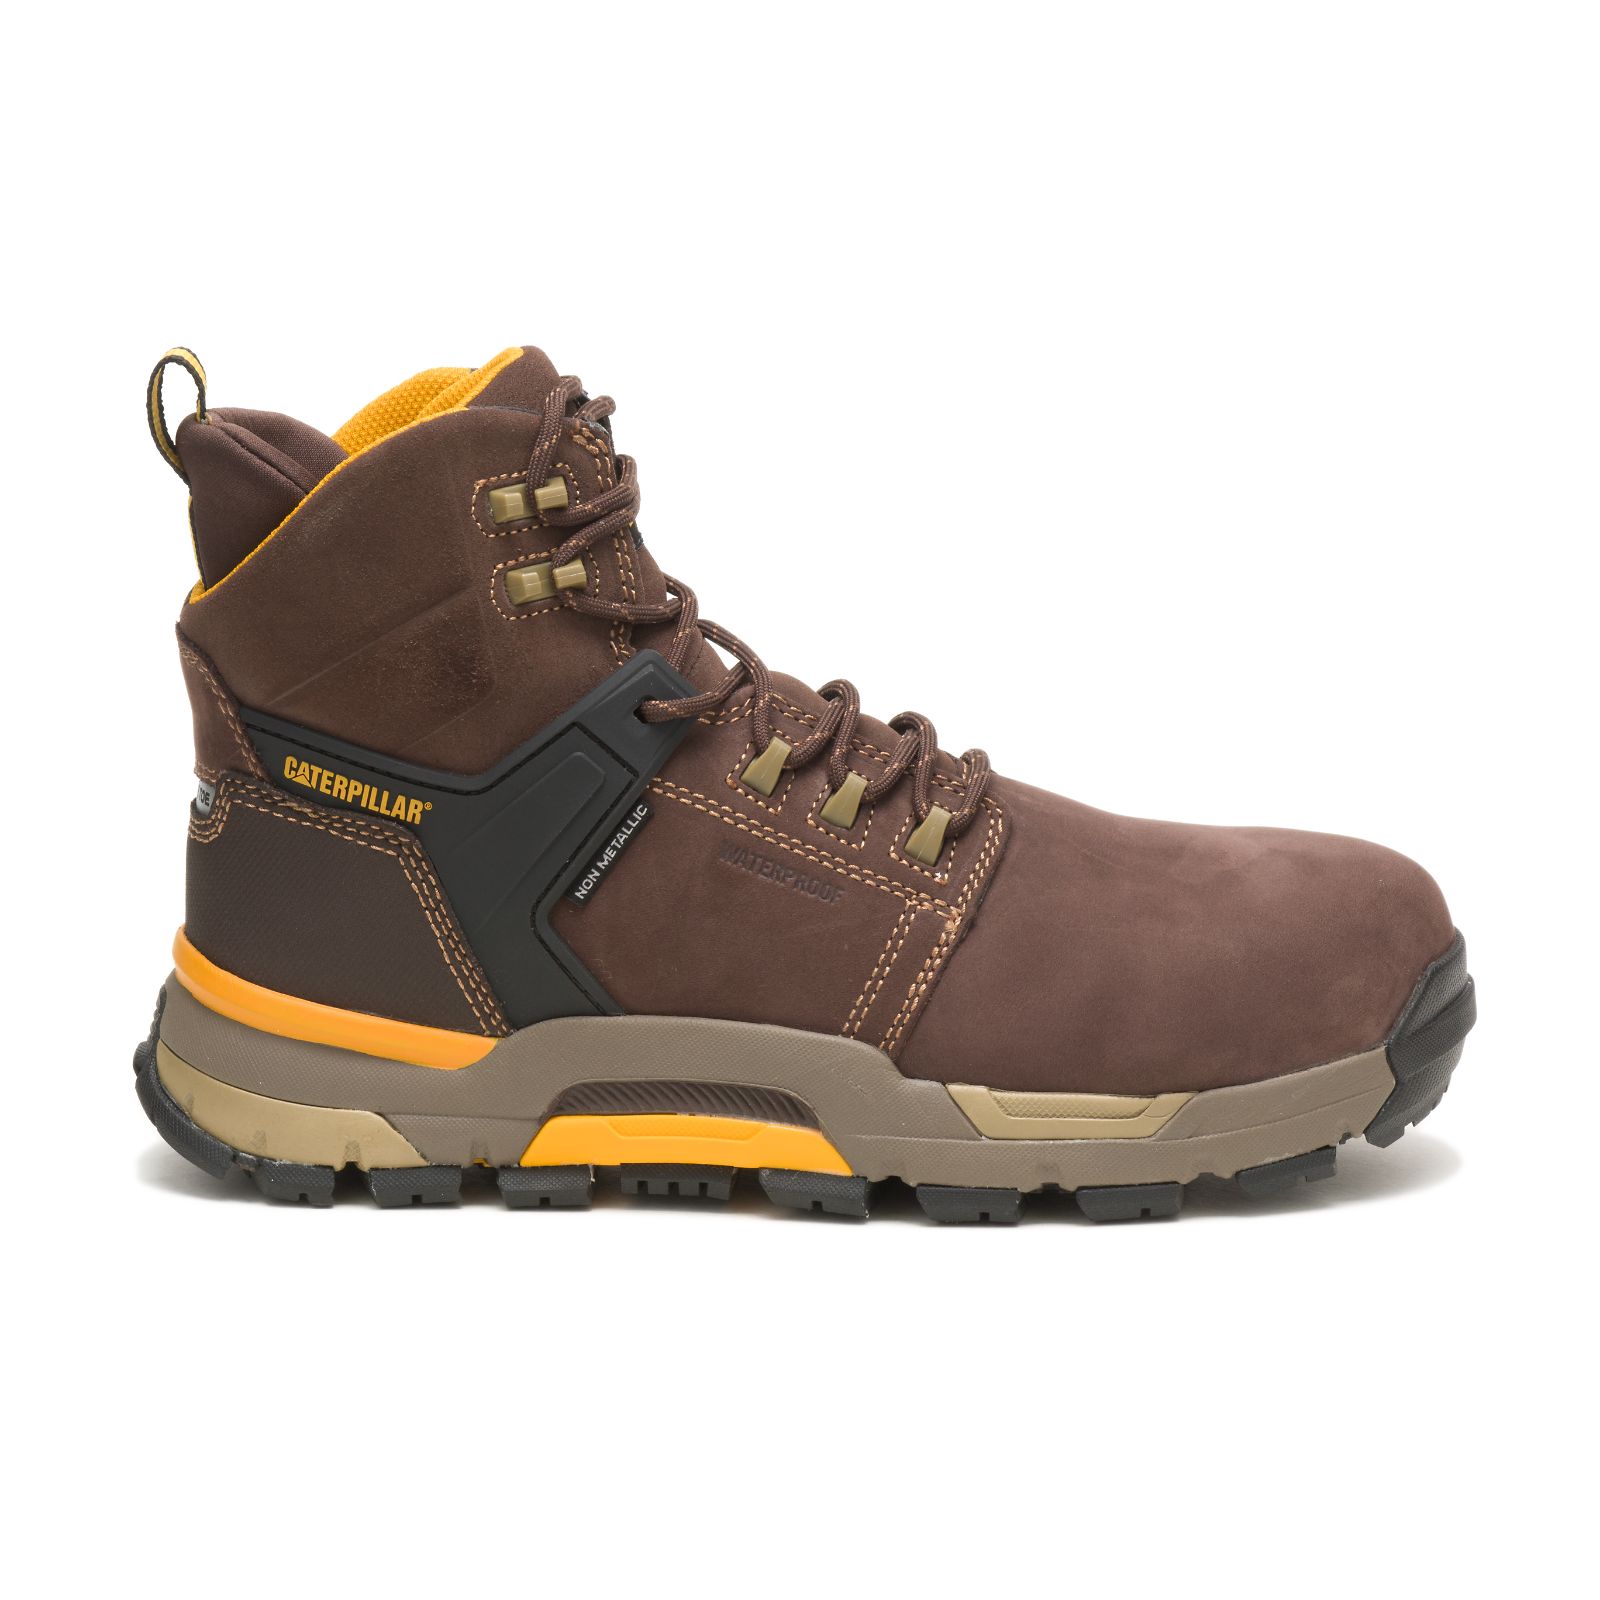 vee naast Vervolg Caterpillar Shoes Factory Outlet - Caterpillar Shoes For Sale